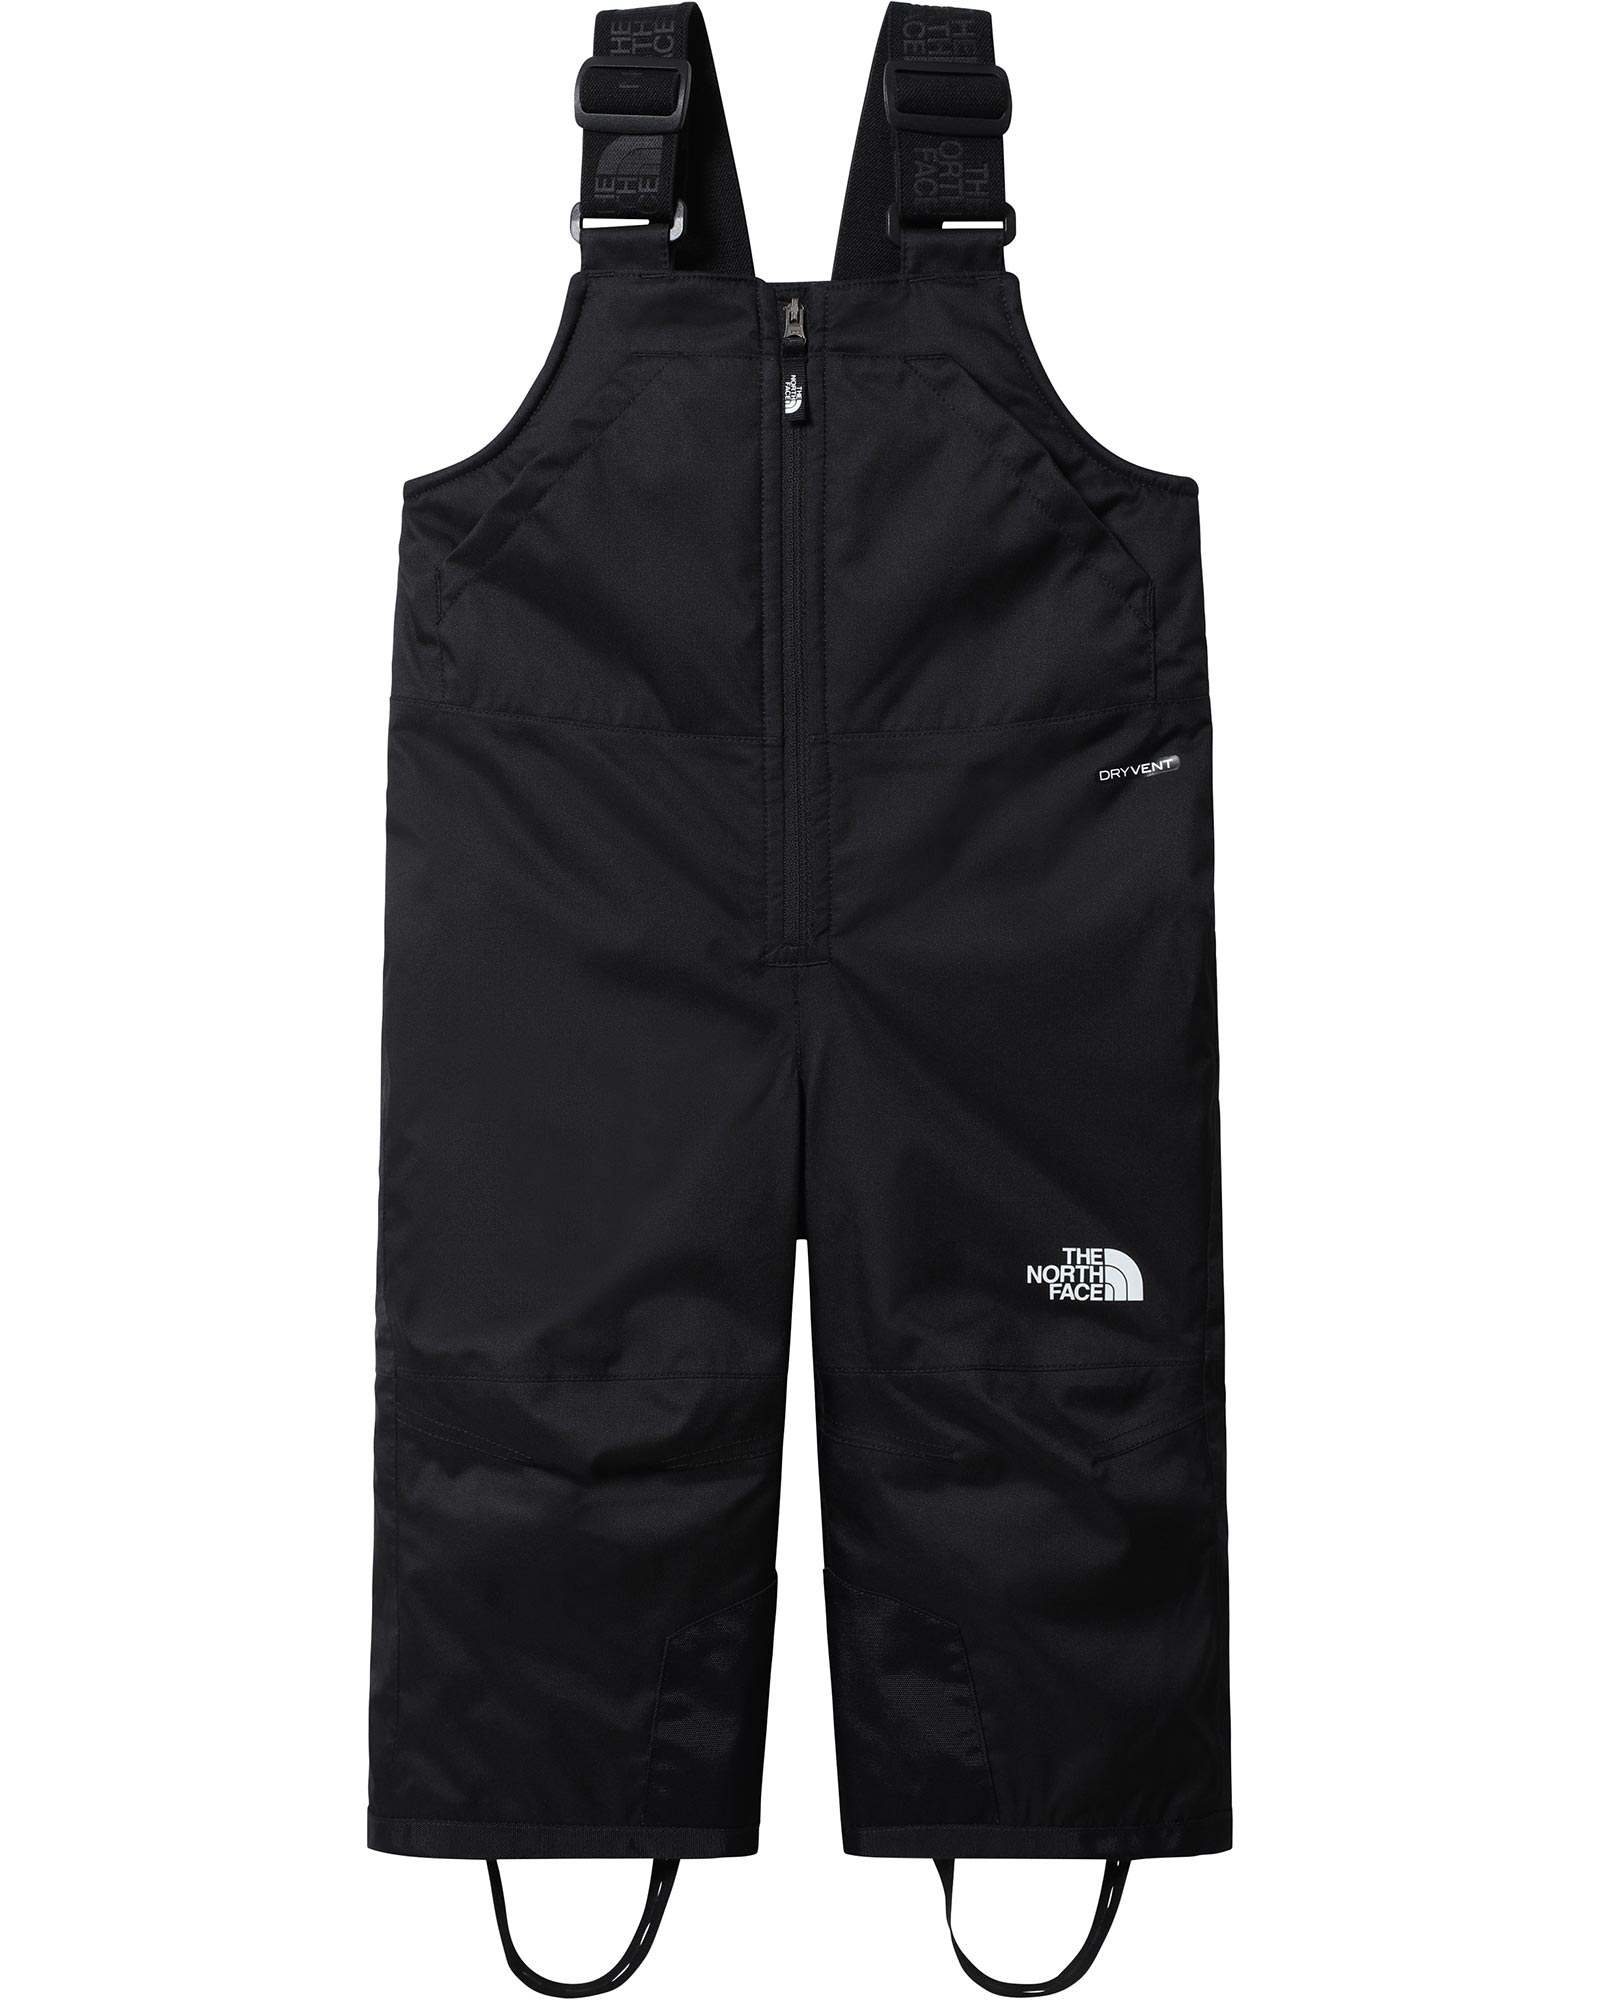 The North Face Snowquest Toddler Insulated Bib